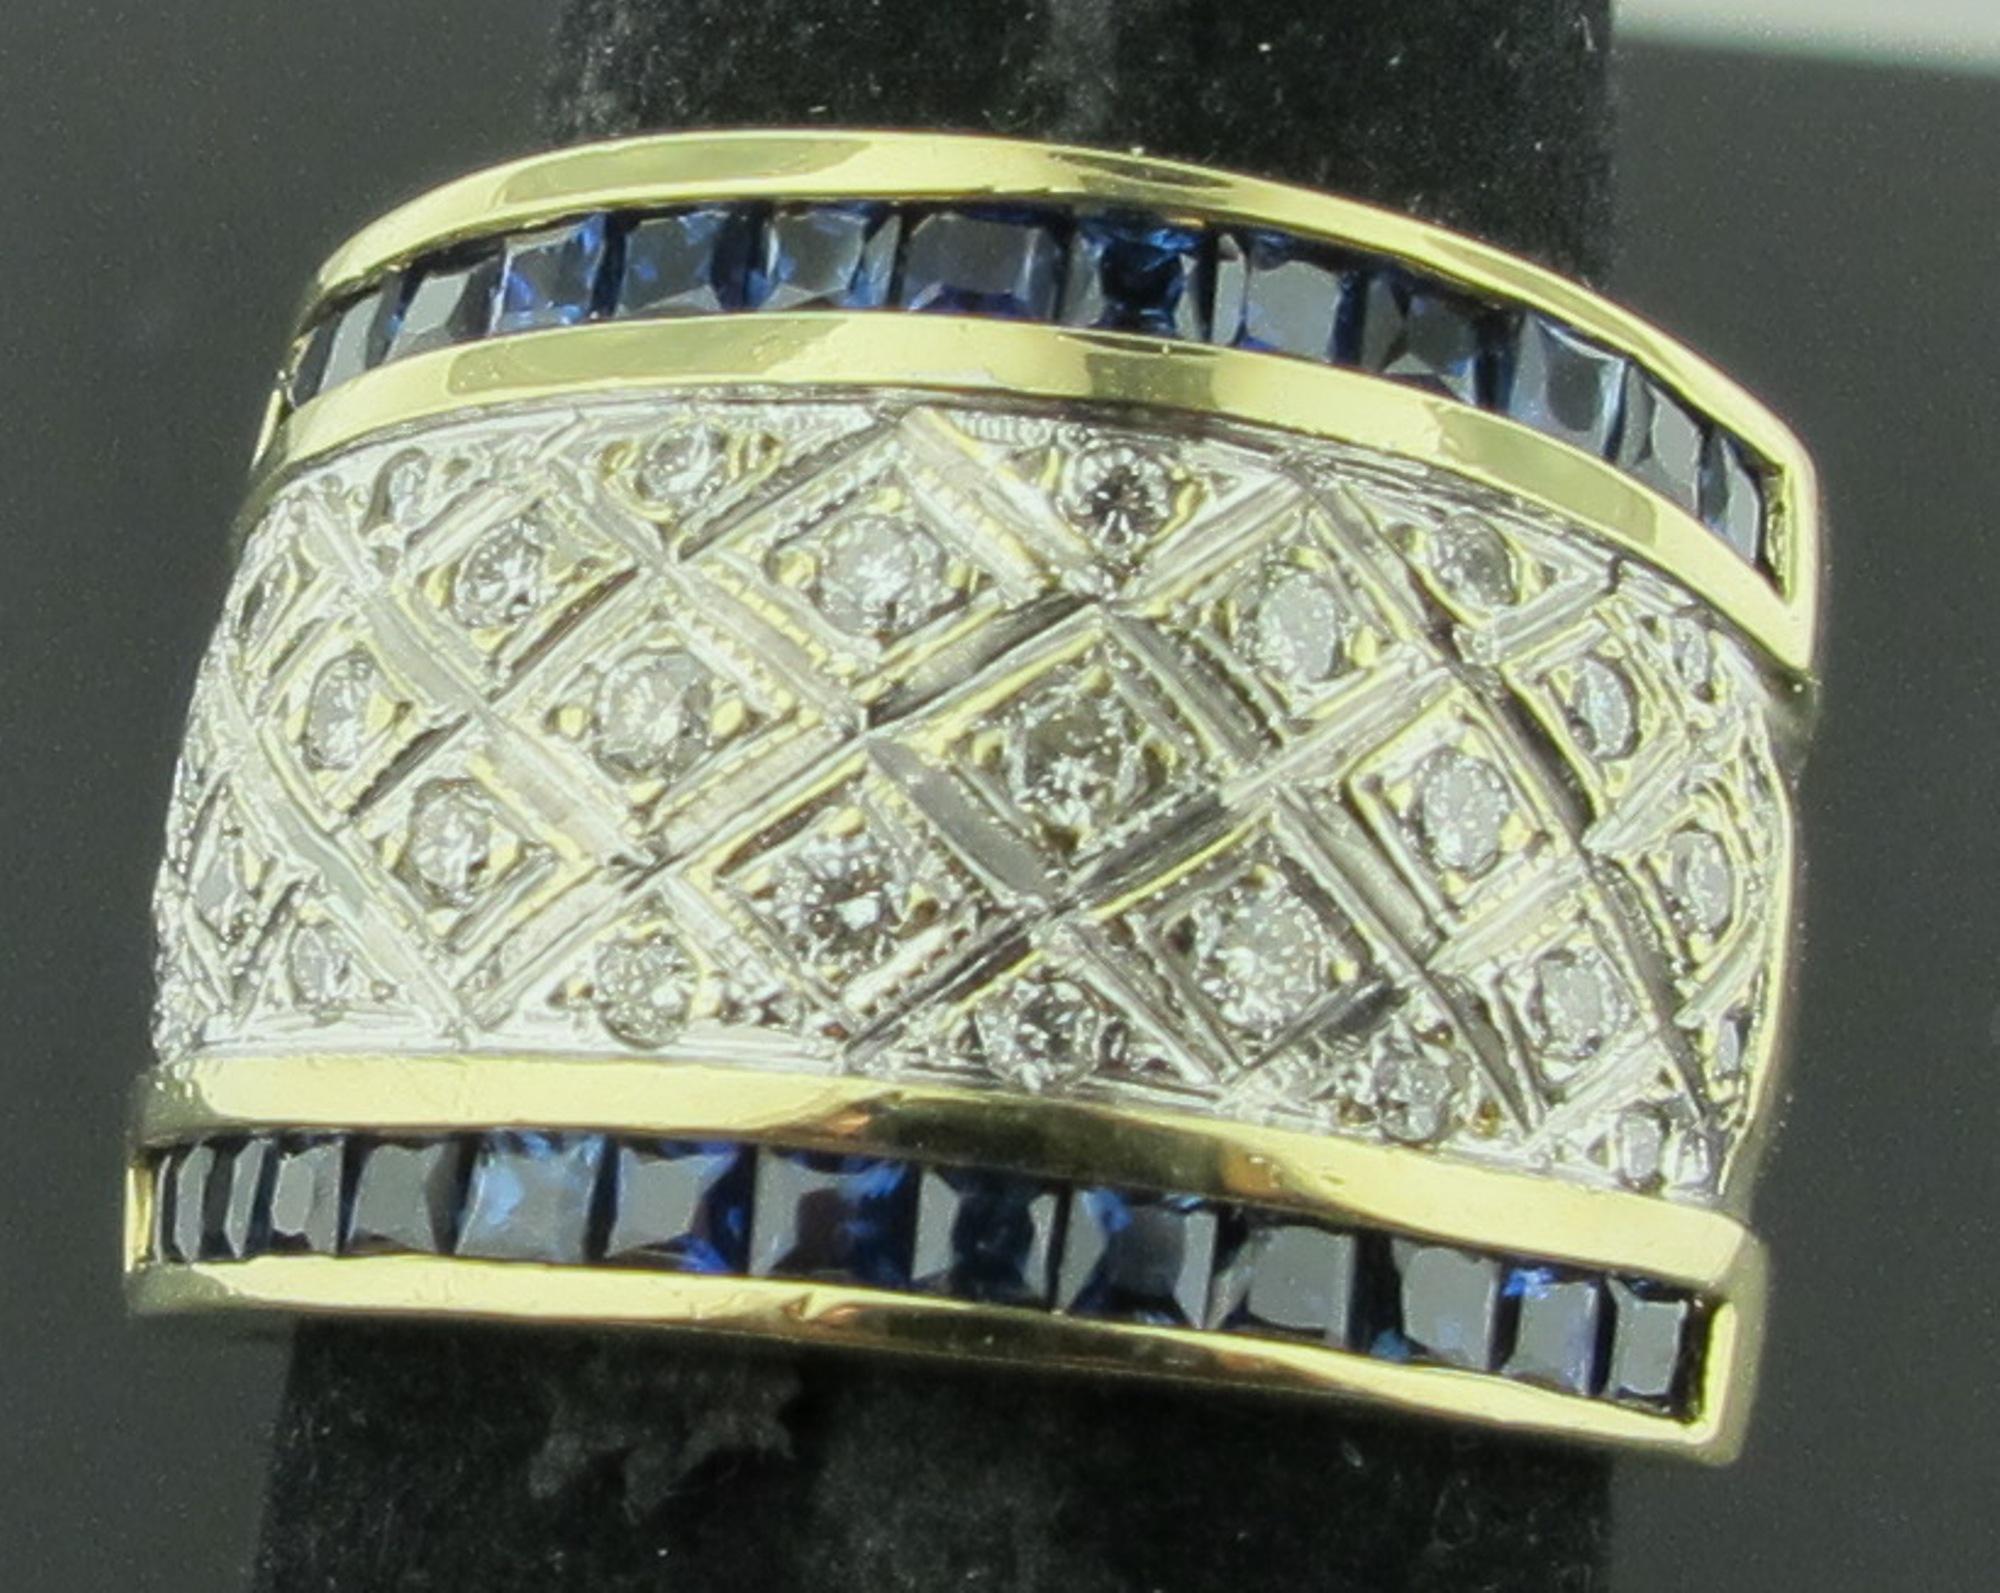 14 karat yellow gold ring with 28 square blue sapphires weighing approximately 1.33 carats and 32 round brilliant cut diamonds with a total weight of approximately 0.25 carats.  Ring Size is 7.